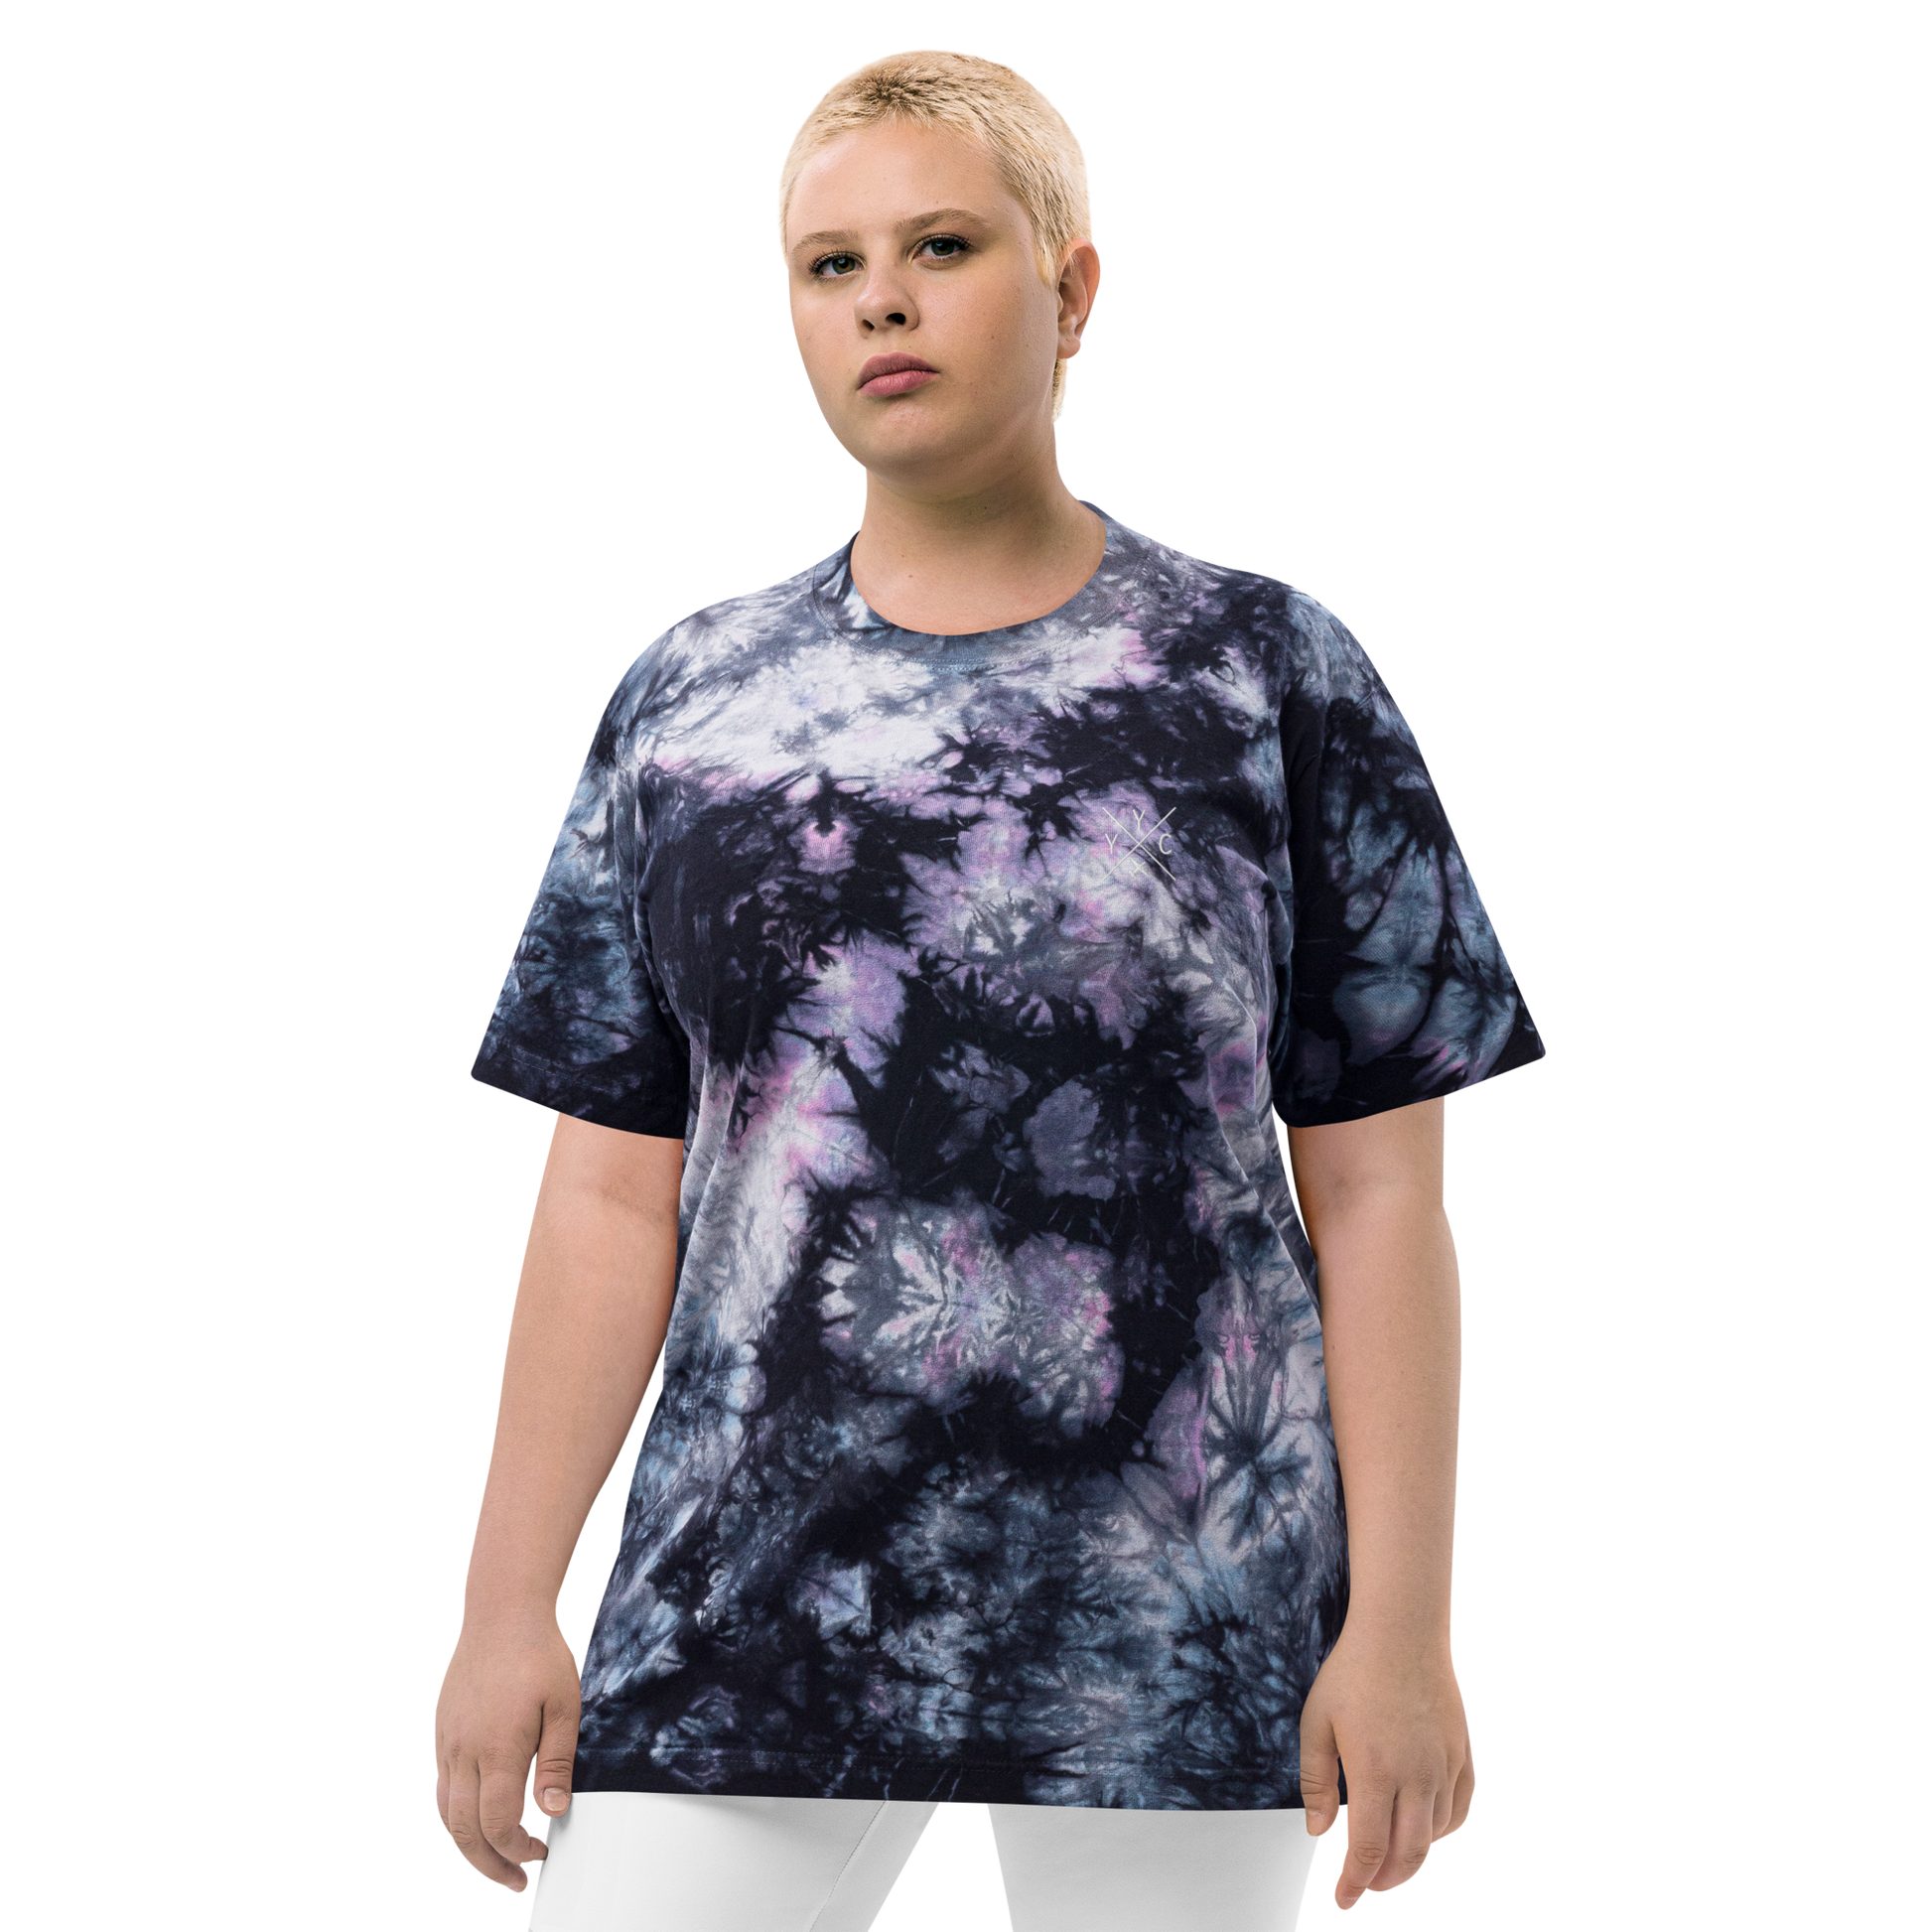 YHM Designs - YYC Calgary Oversized Tie-Dye T-Shirt - Crossed-X Design with Airport Code and Vintage Propliner - White Embroidery - Image 05